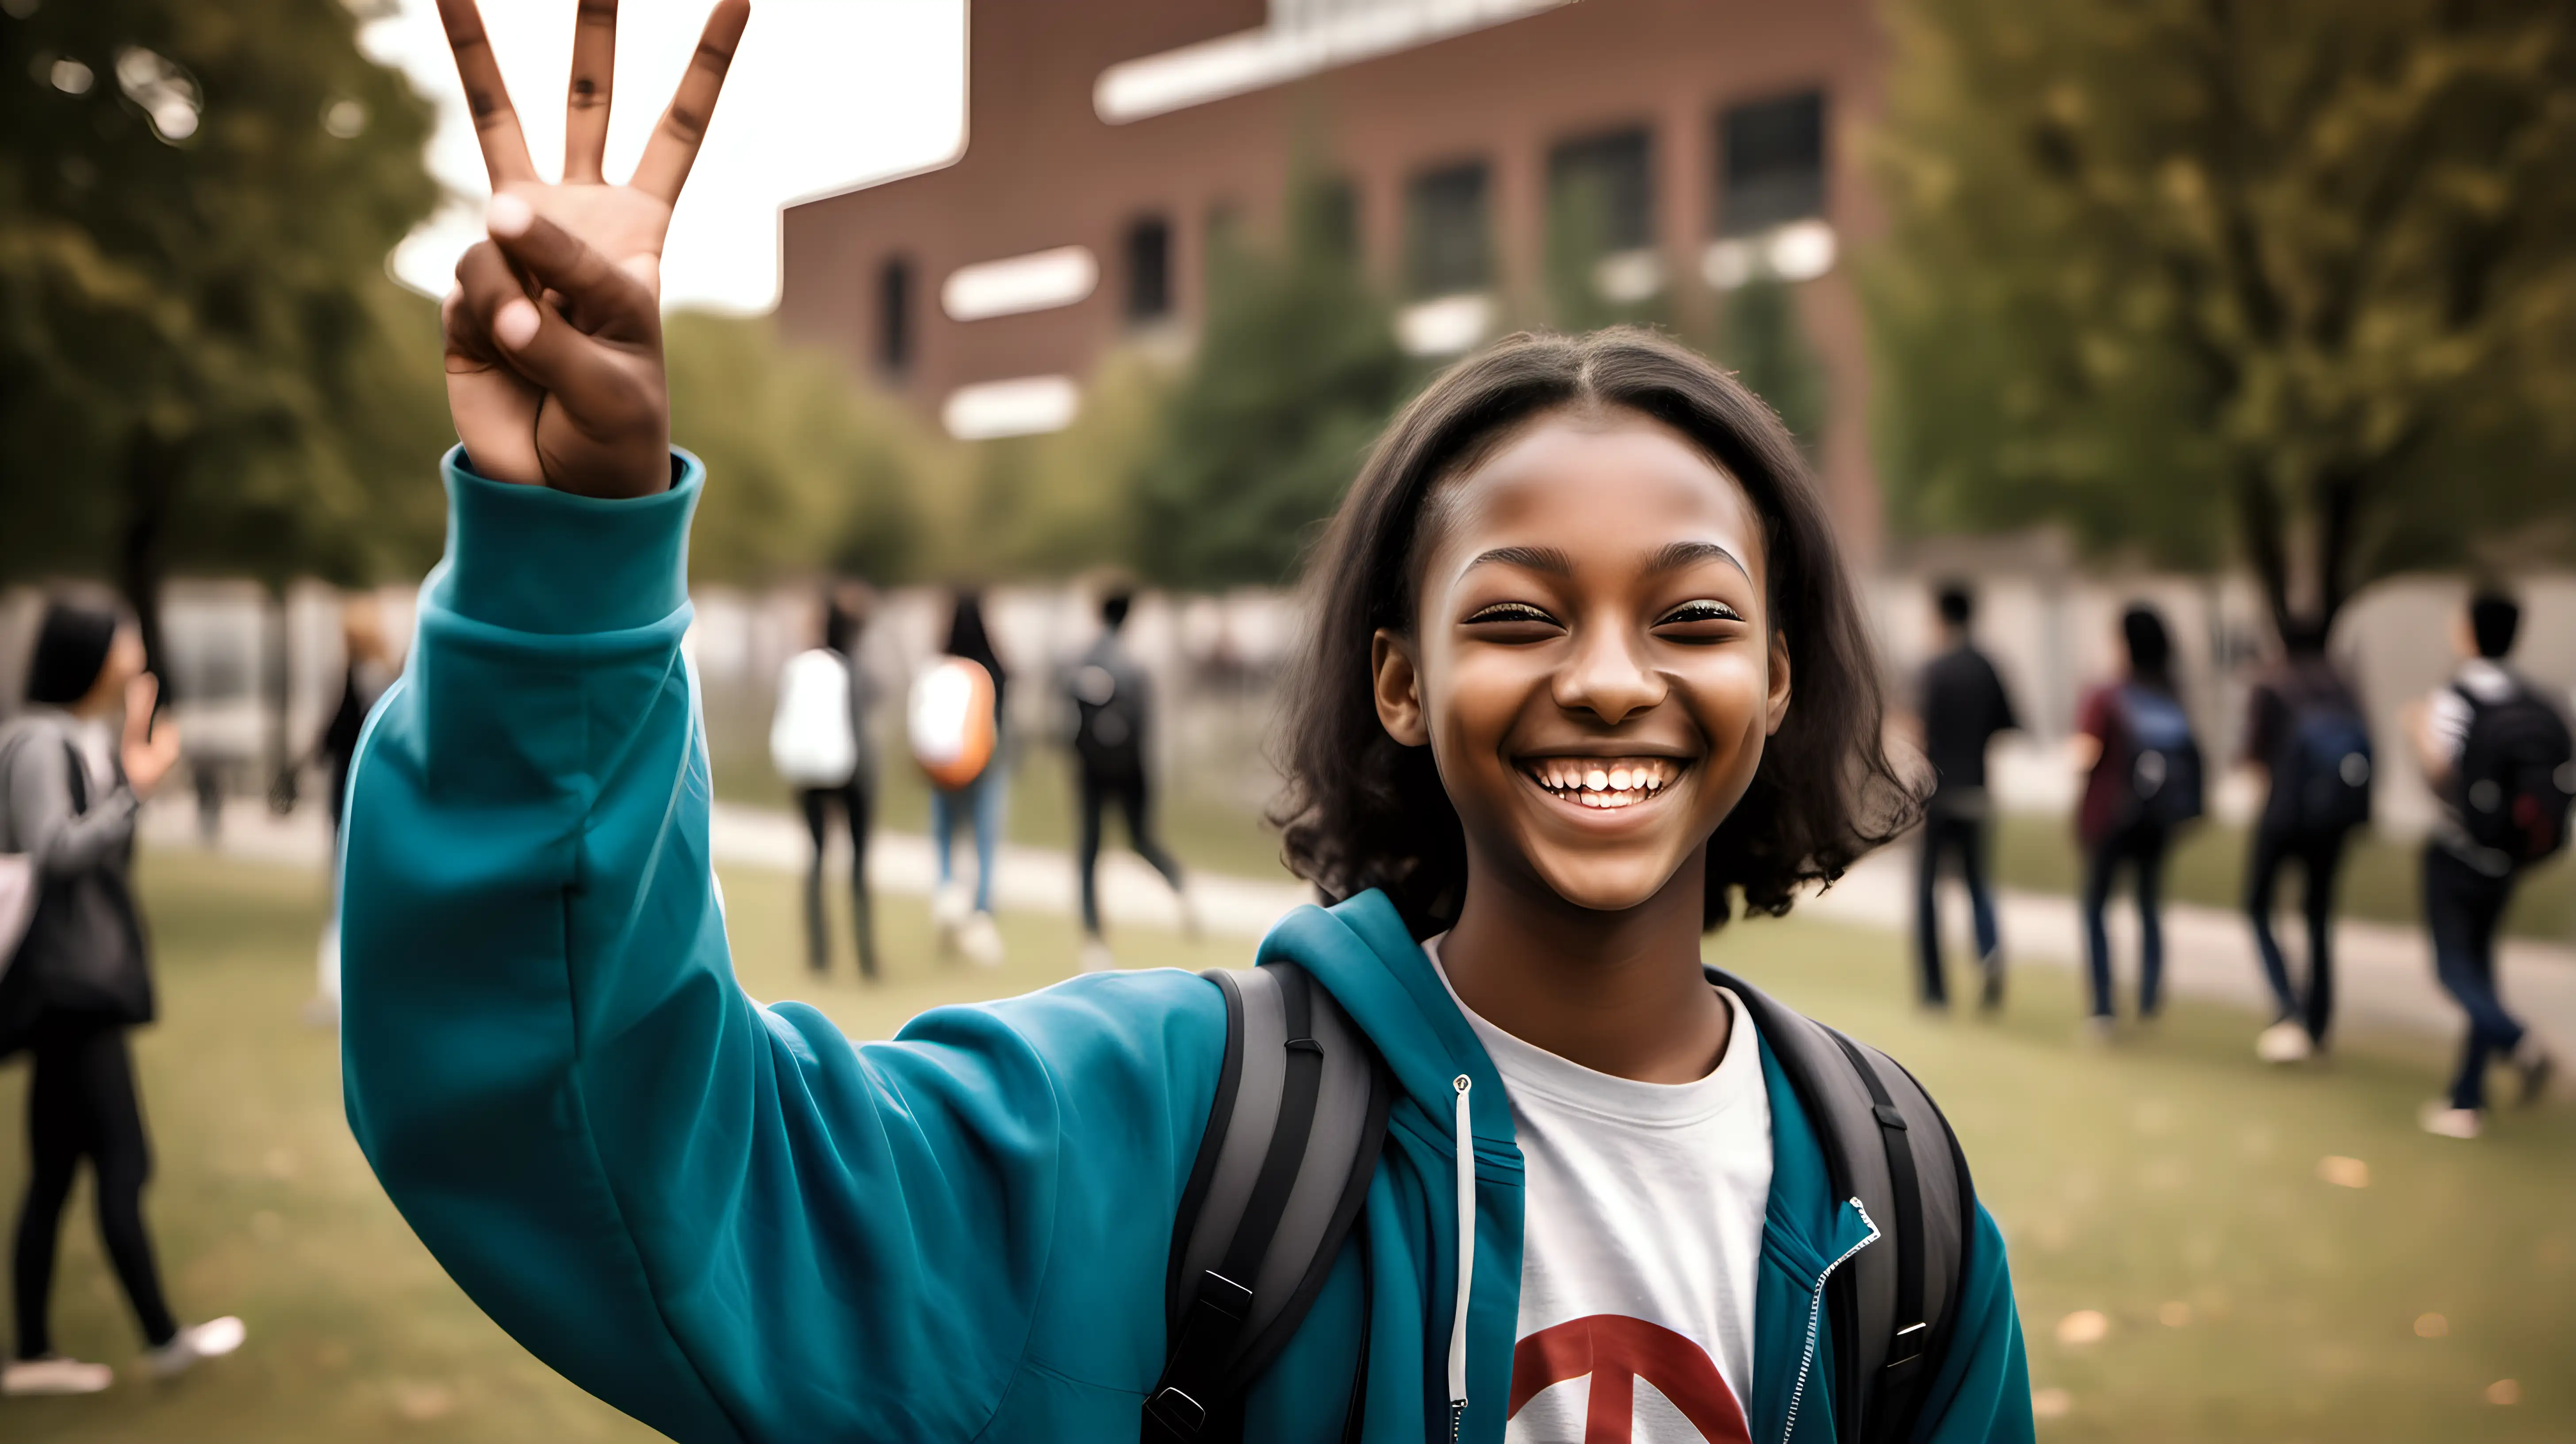 A student holding up a peace sign with a smile, triumphantly displaying victory after acing a difficult exam.
